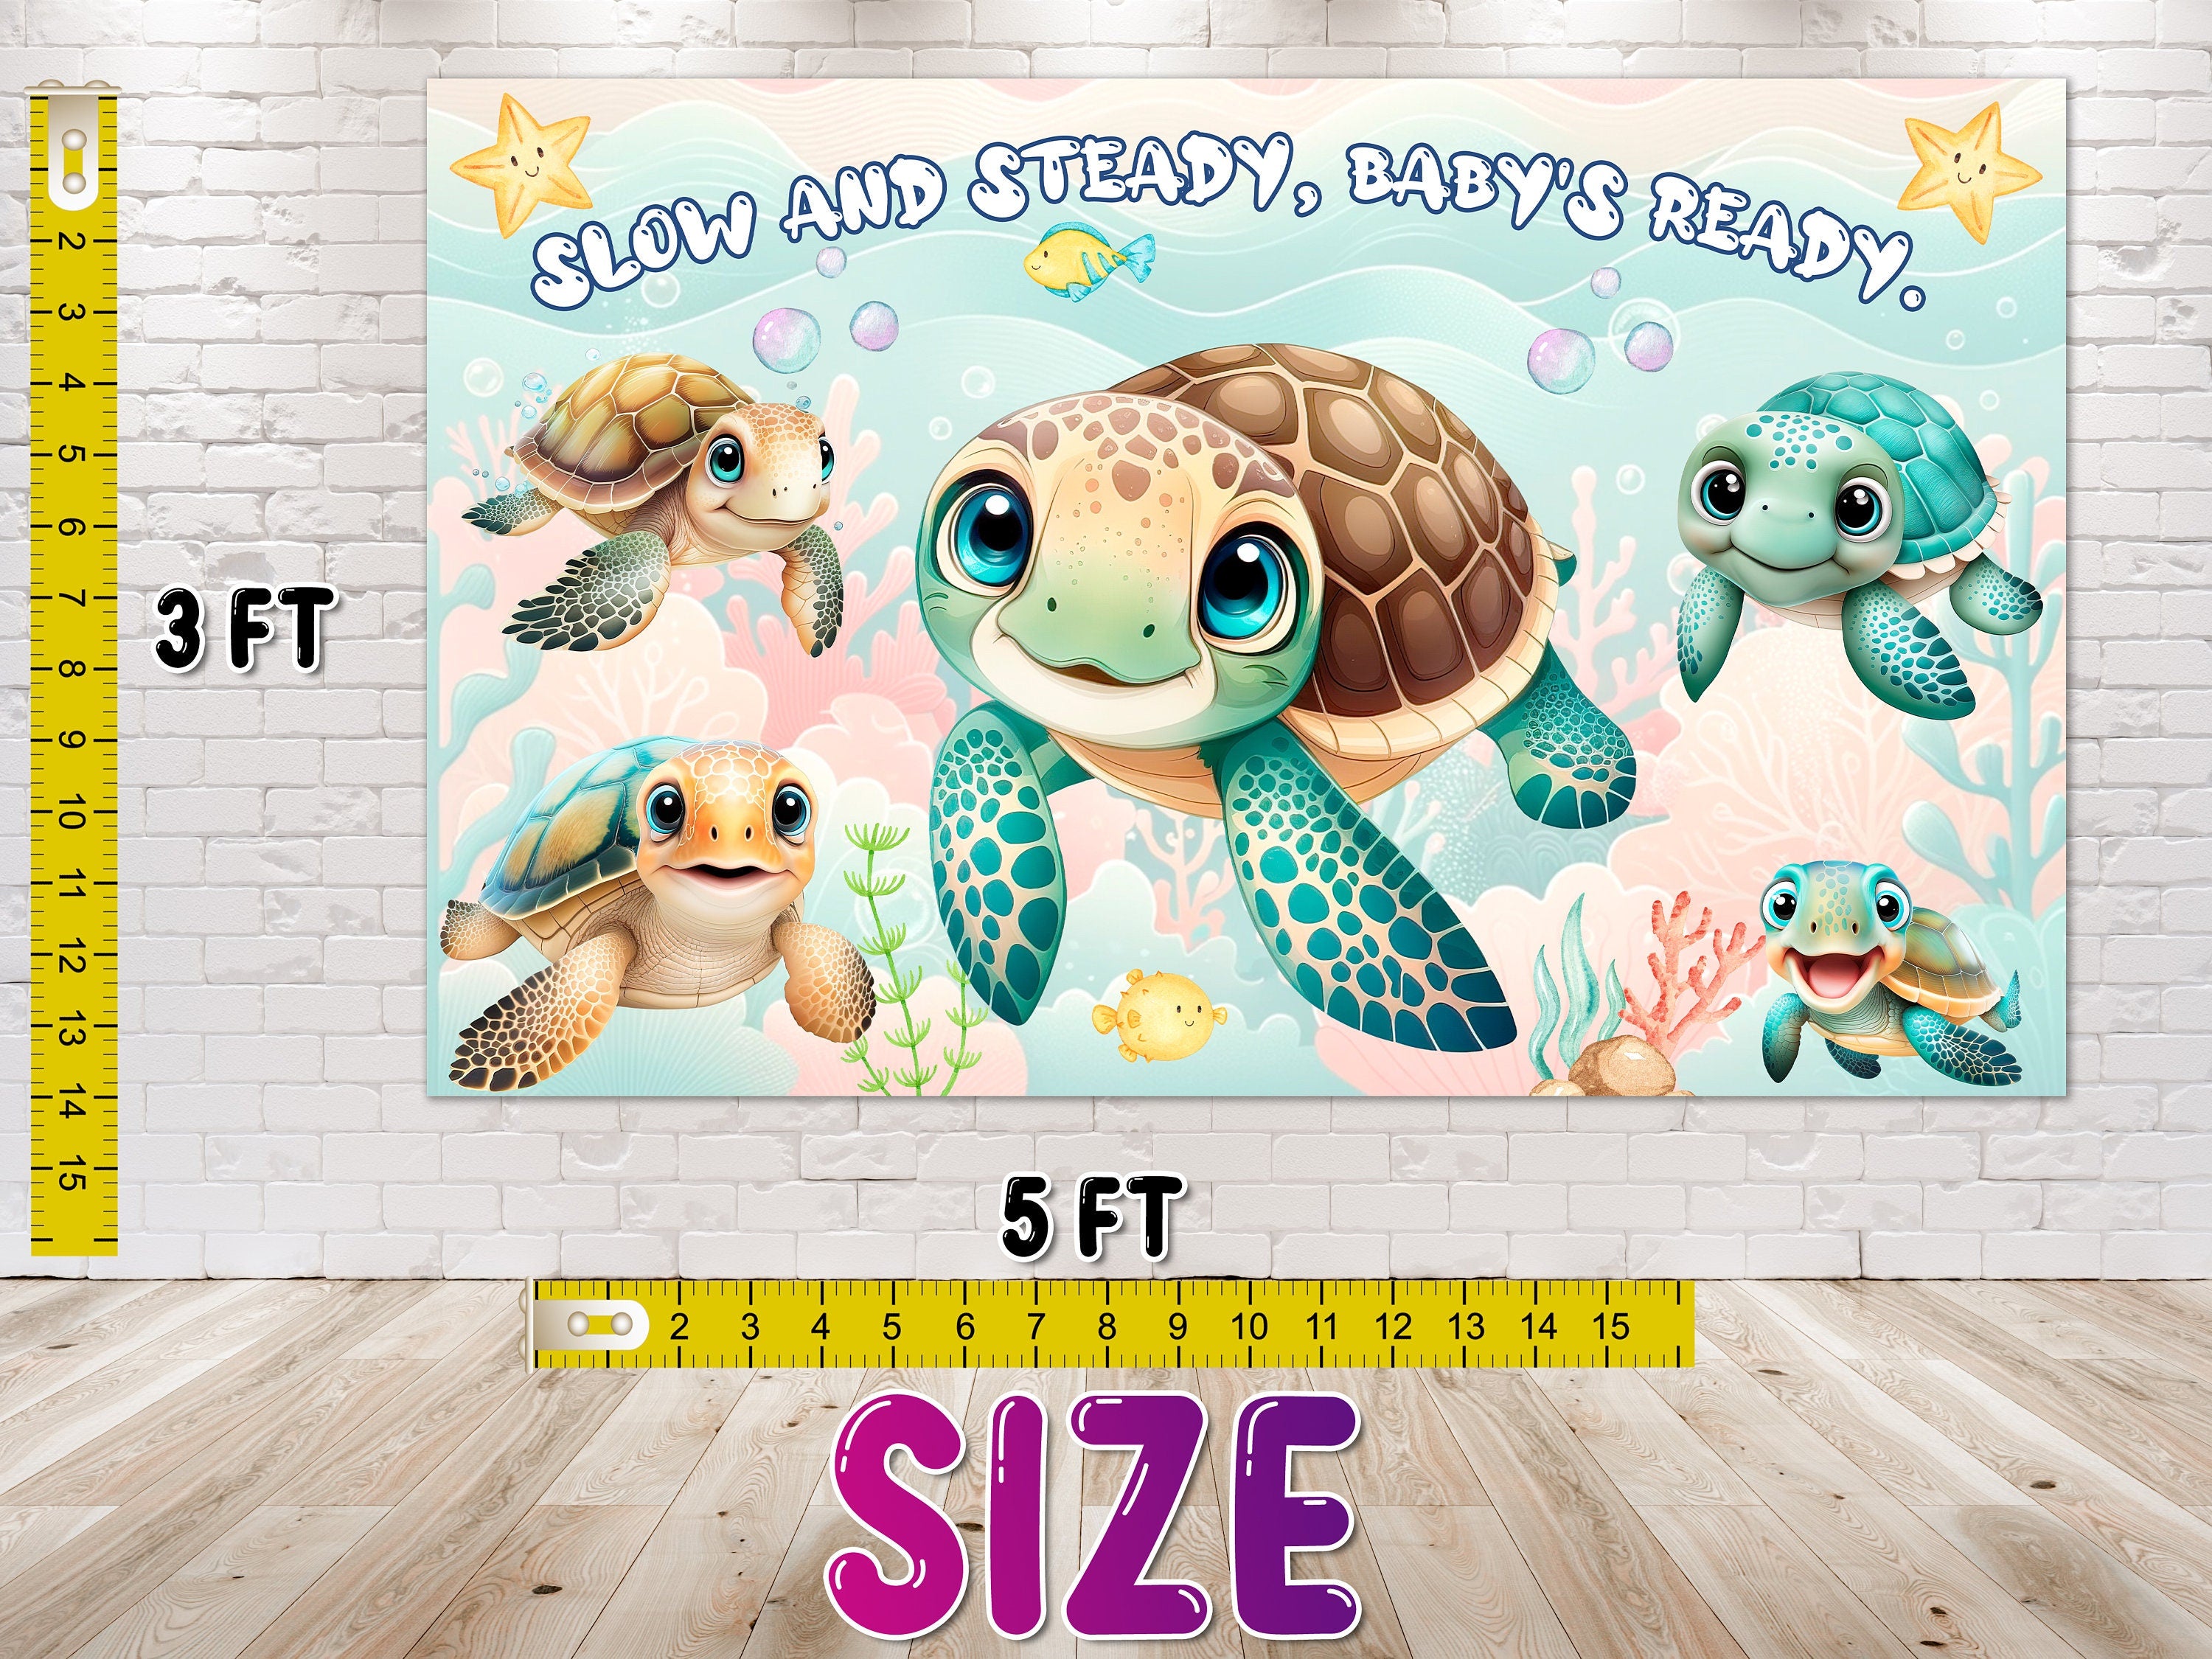 Adorable Turtle Baby Shower Backdrop 5x3 FT - "Slow and Steady, Baby's Ready" Underwater Party Decor